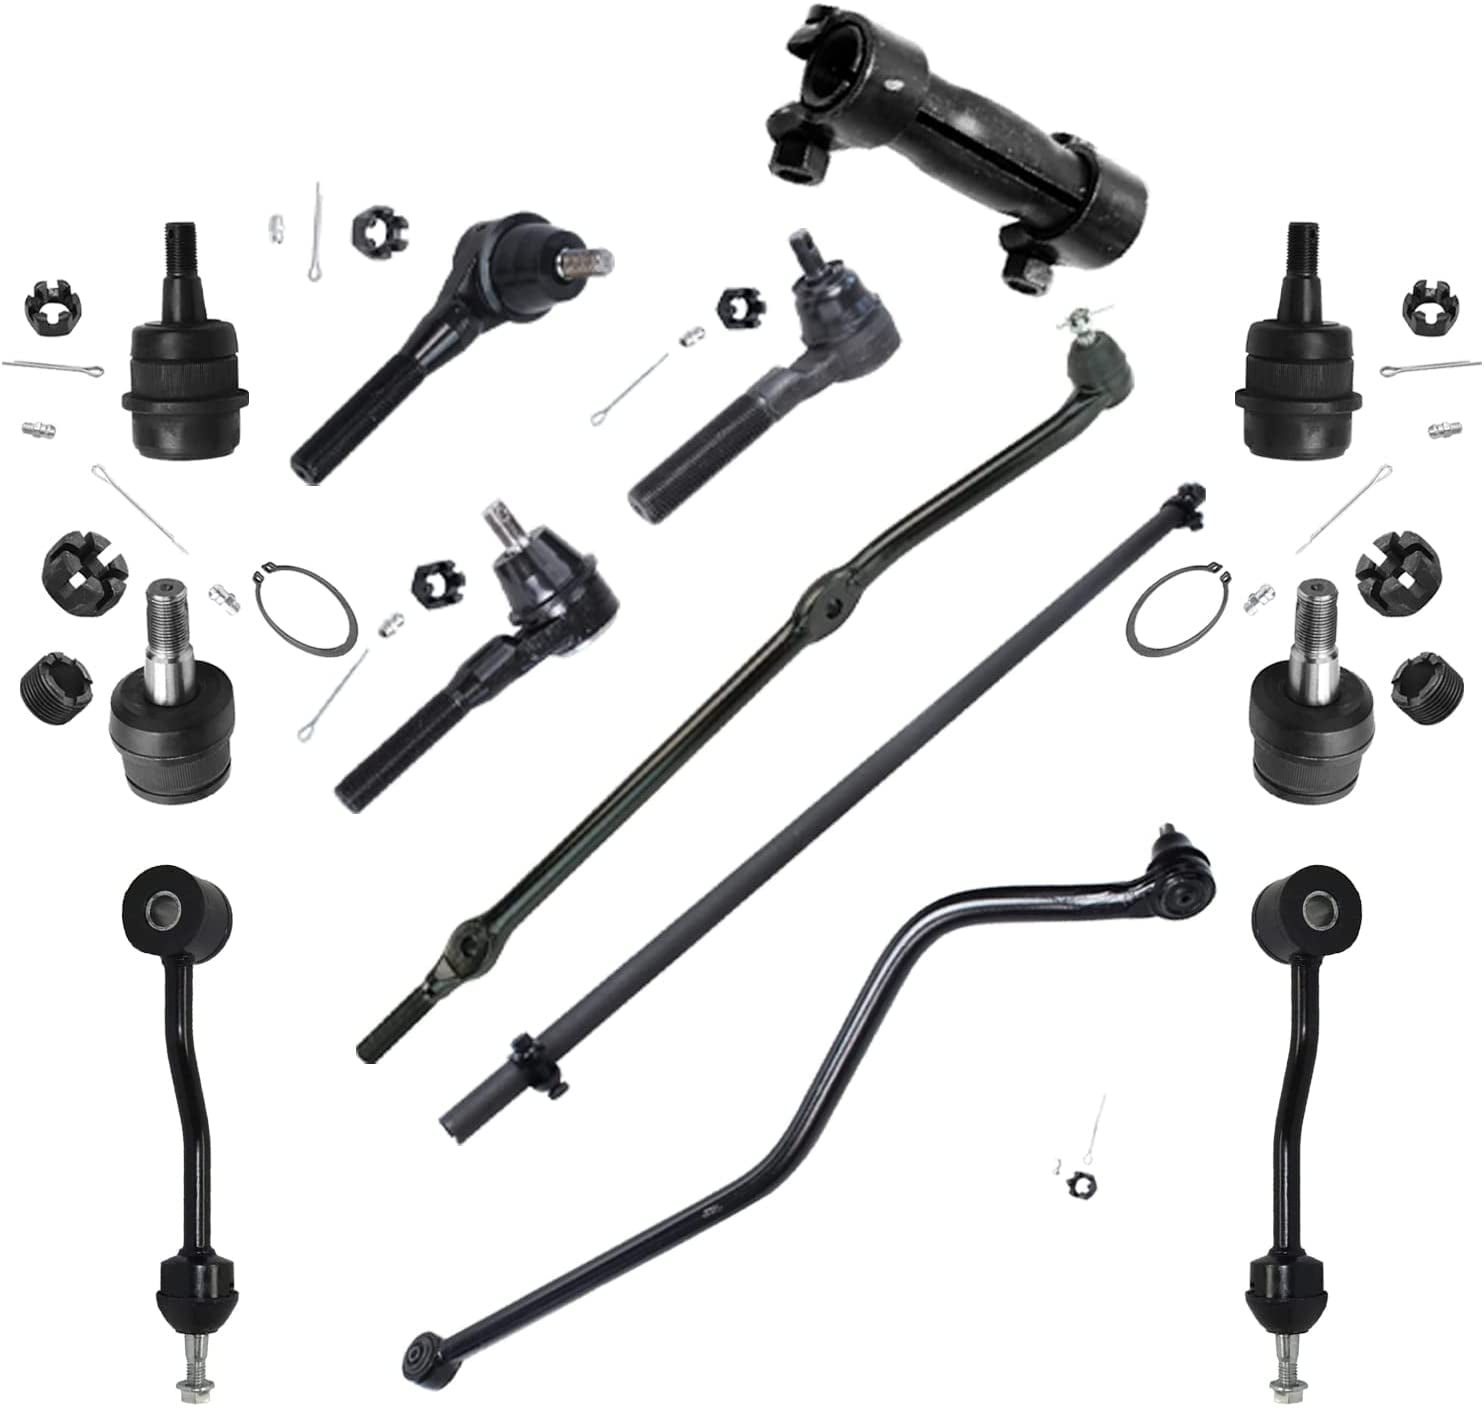 Tie Rods Adjusting Sleeves Drag Link Ball Joints Sway Links 12pc Kit for Jeep